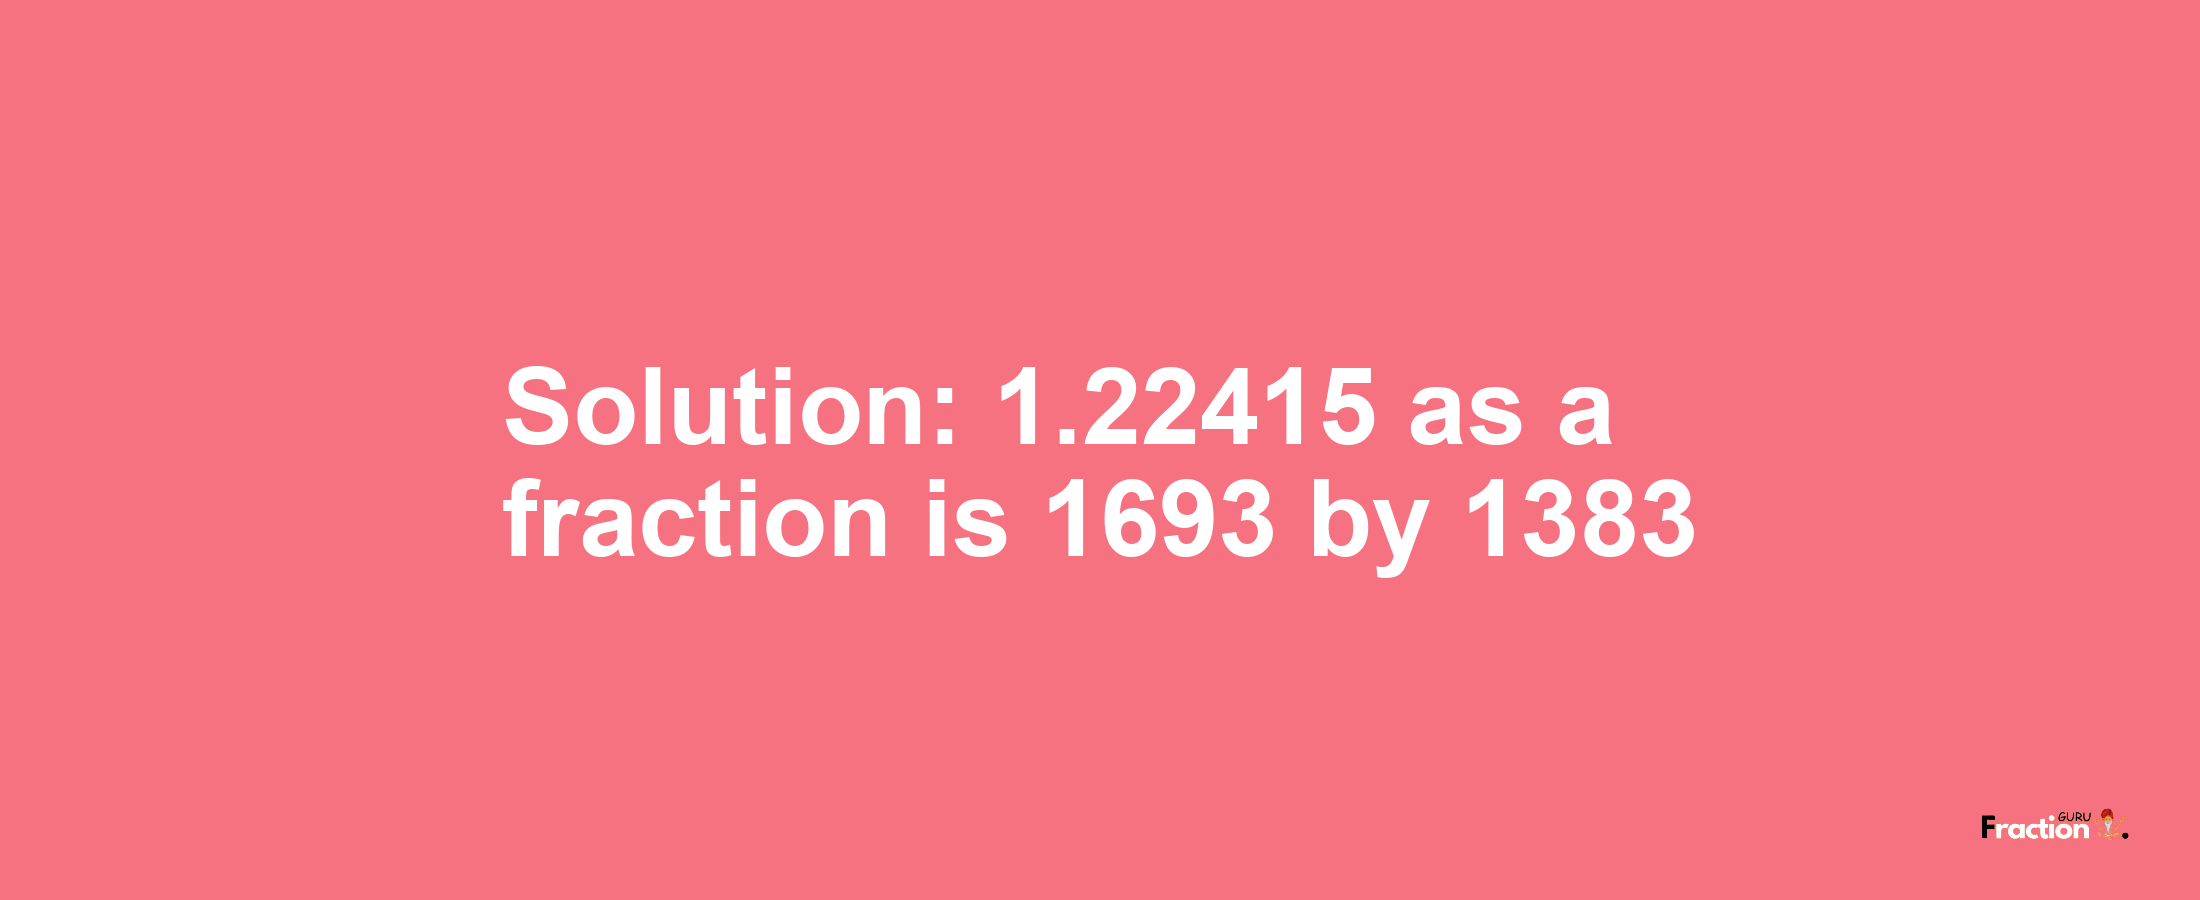 Solution:1.22415 as a fraction is 1693/1383